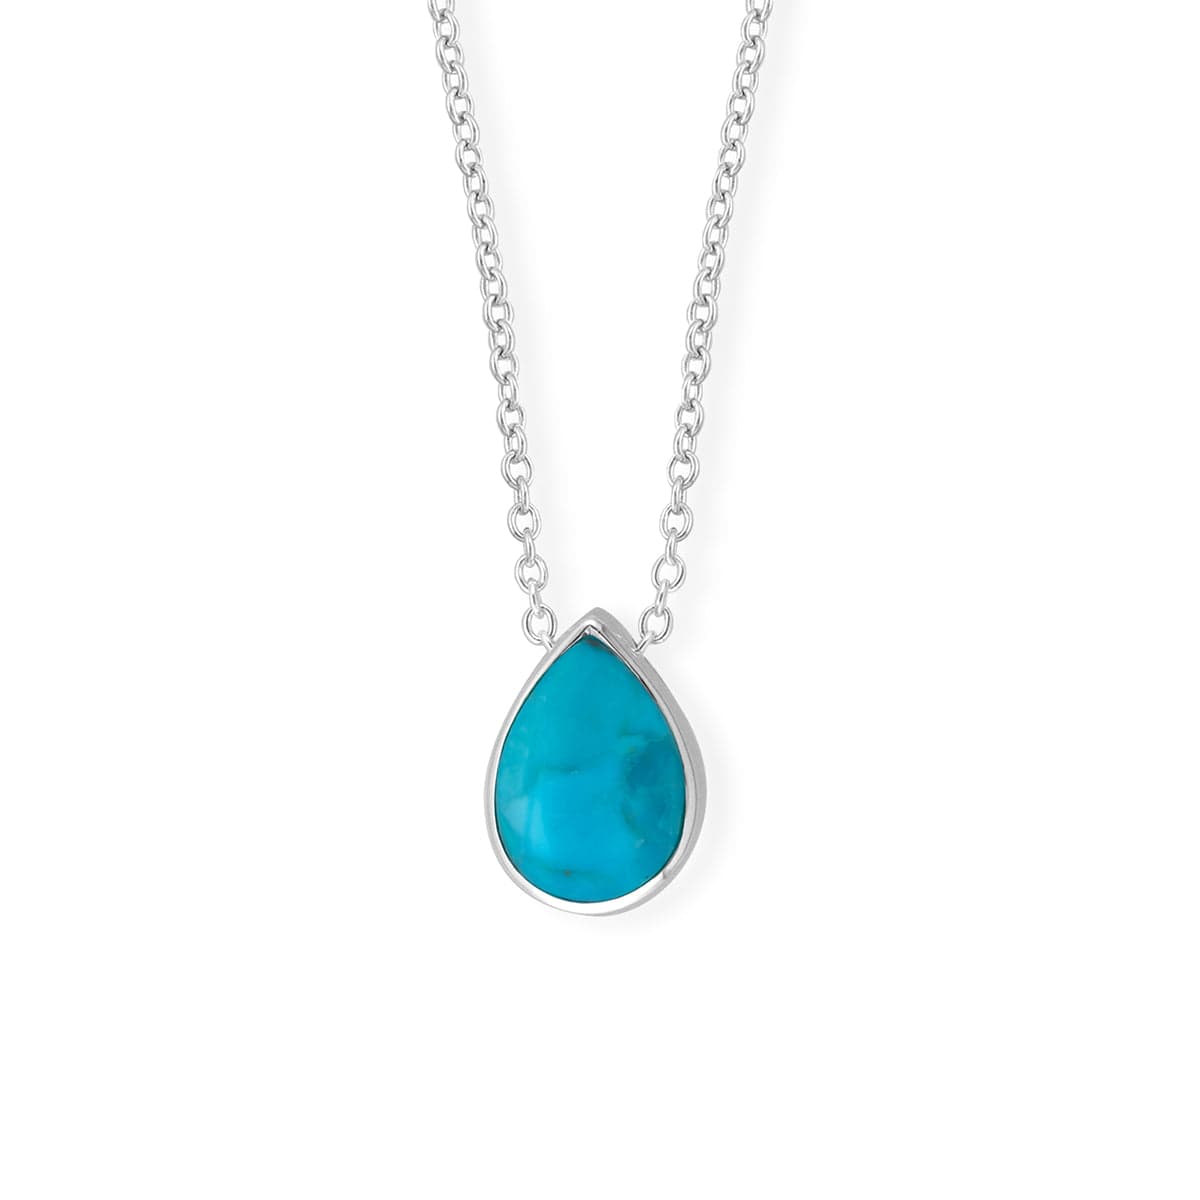 Boma Jewelry Necklaces Turquoise / Sterling Silver Treasured Teardrop Pendant Necklace